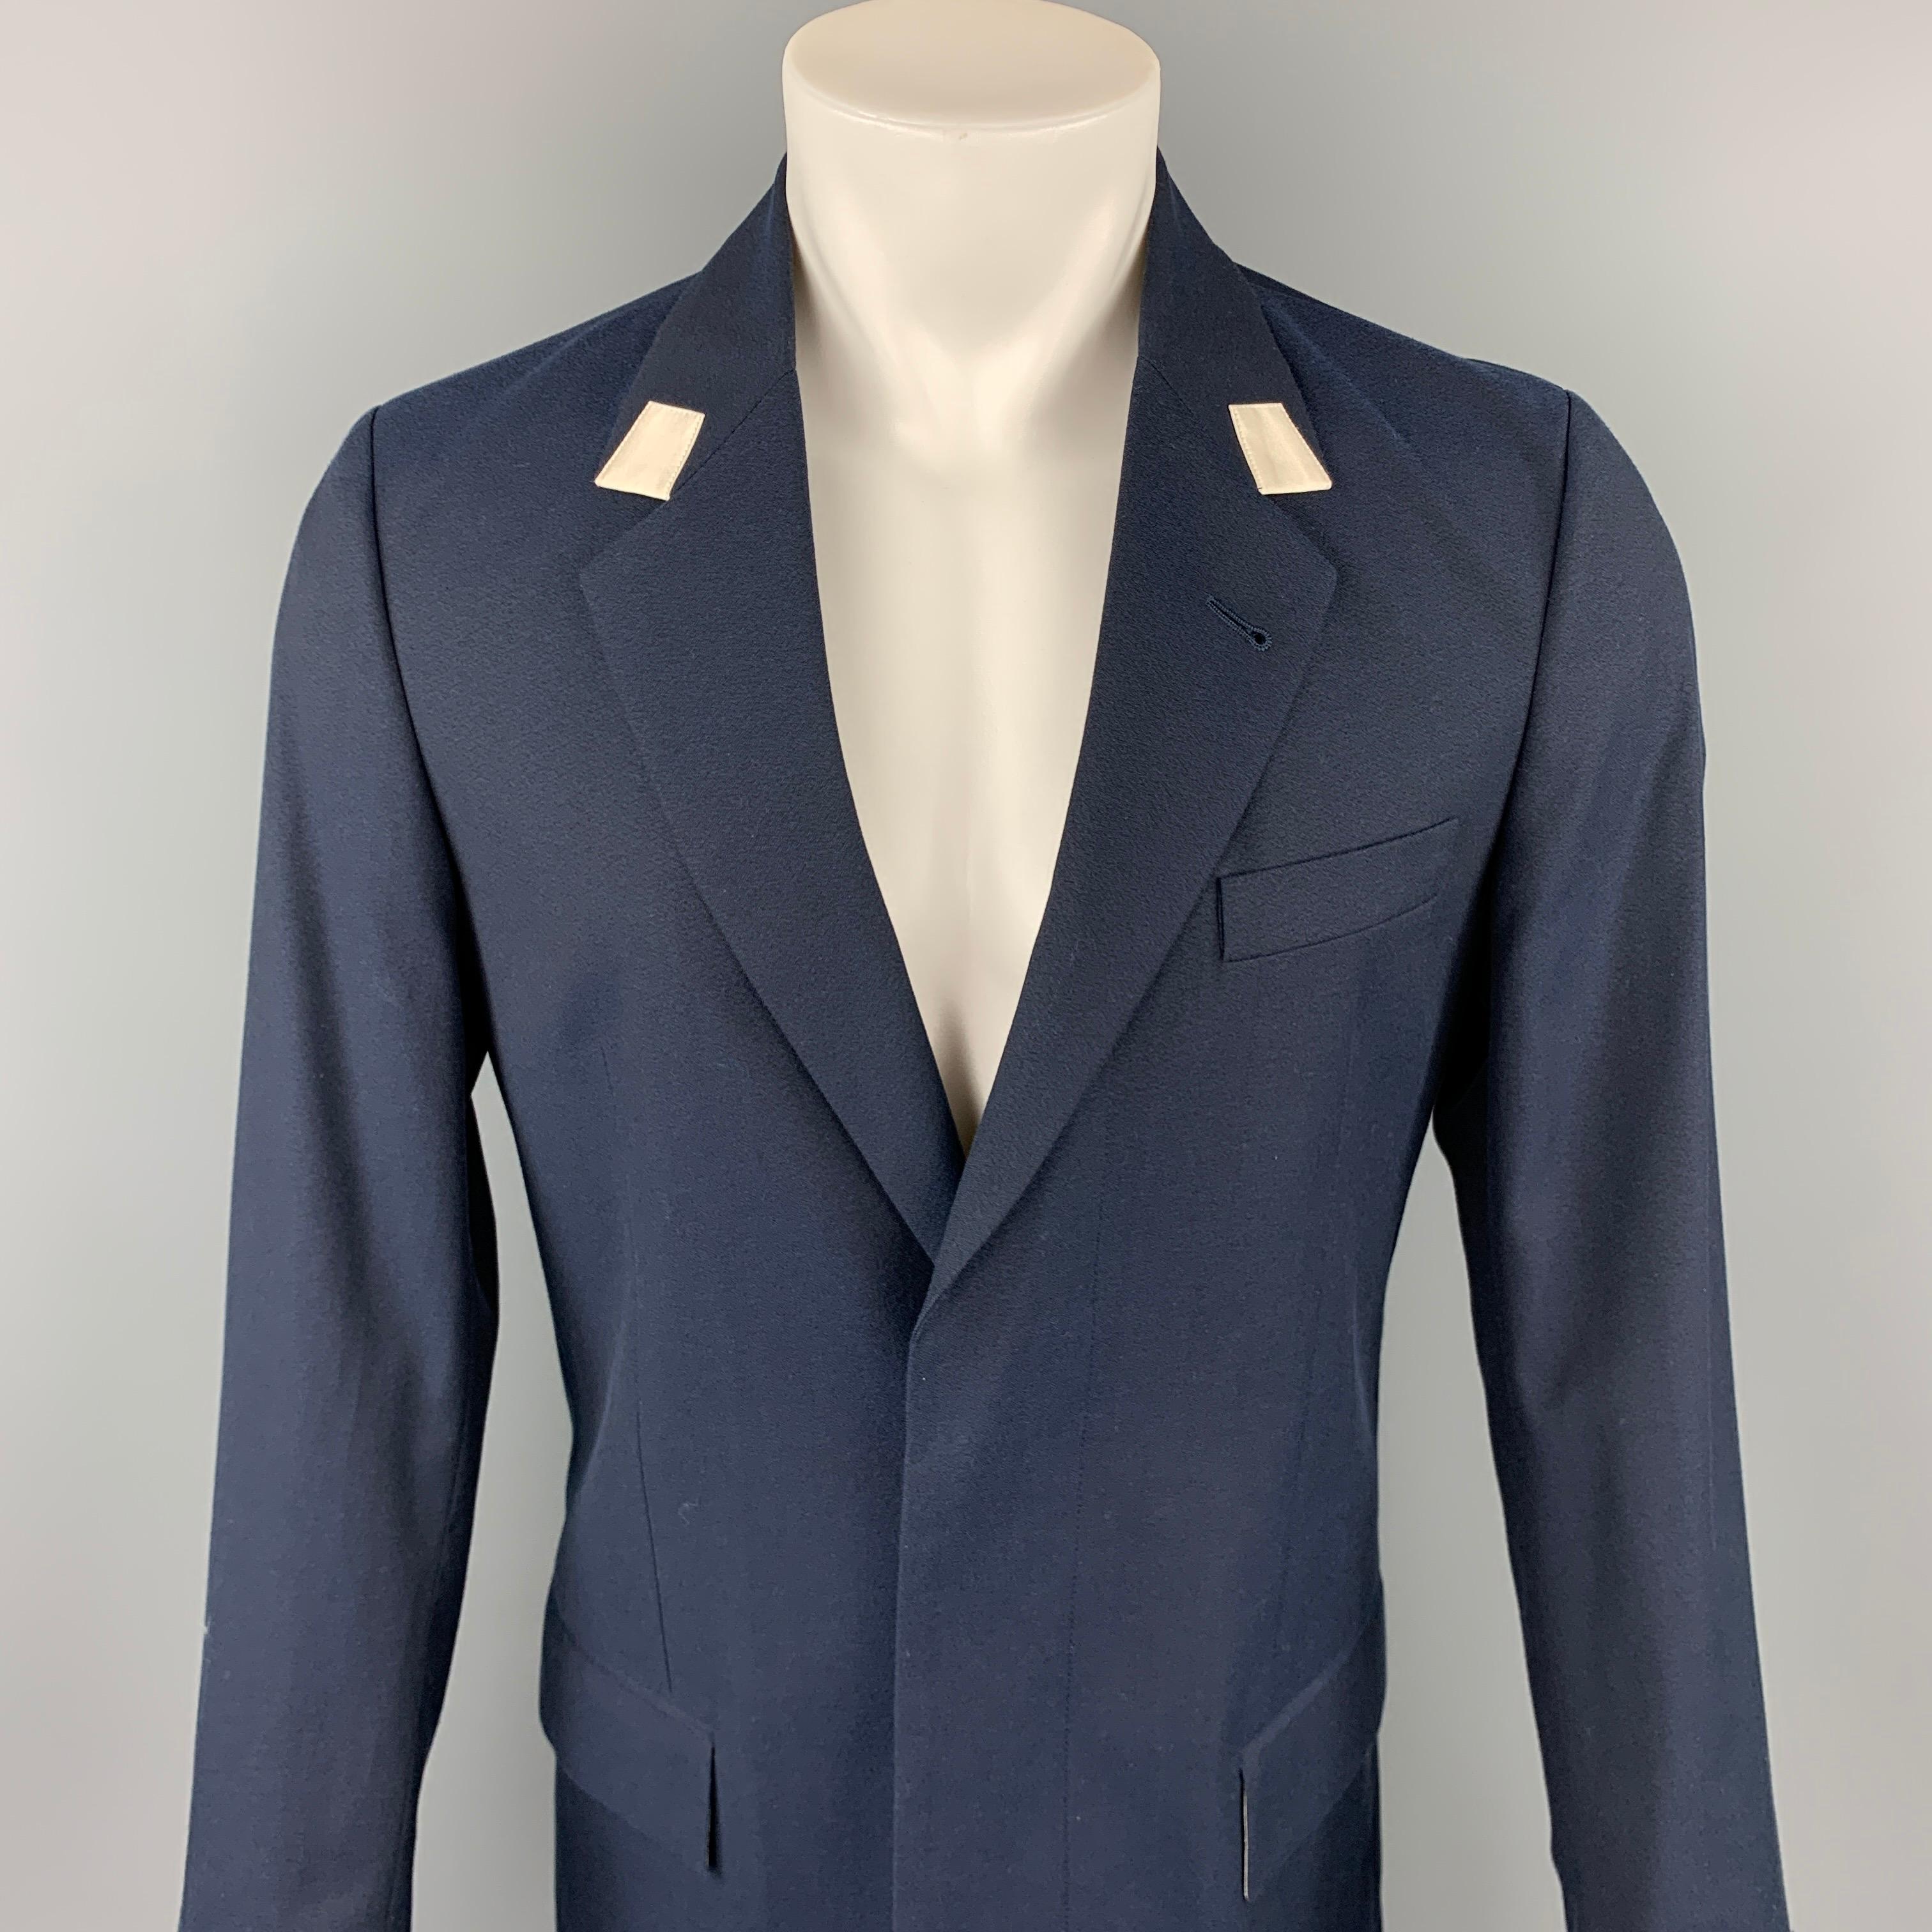 MARC JACOBS coat comes in a navy wool / cotton with a full liner featuring a notch lapel, flap pockets, and a hidden button closure. Made in Italy.

Excellent Pre-Owned Condition.
Marked: IT 46

Measurements:

Shoulder: 17.5 in.
Chest: 38